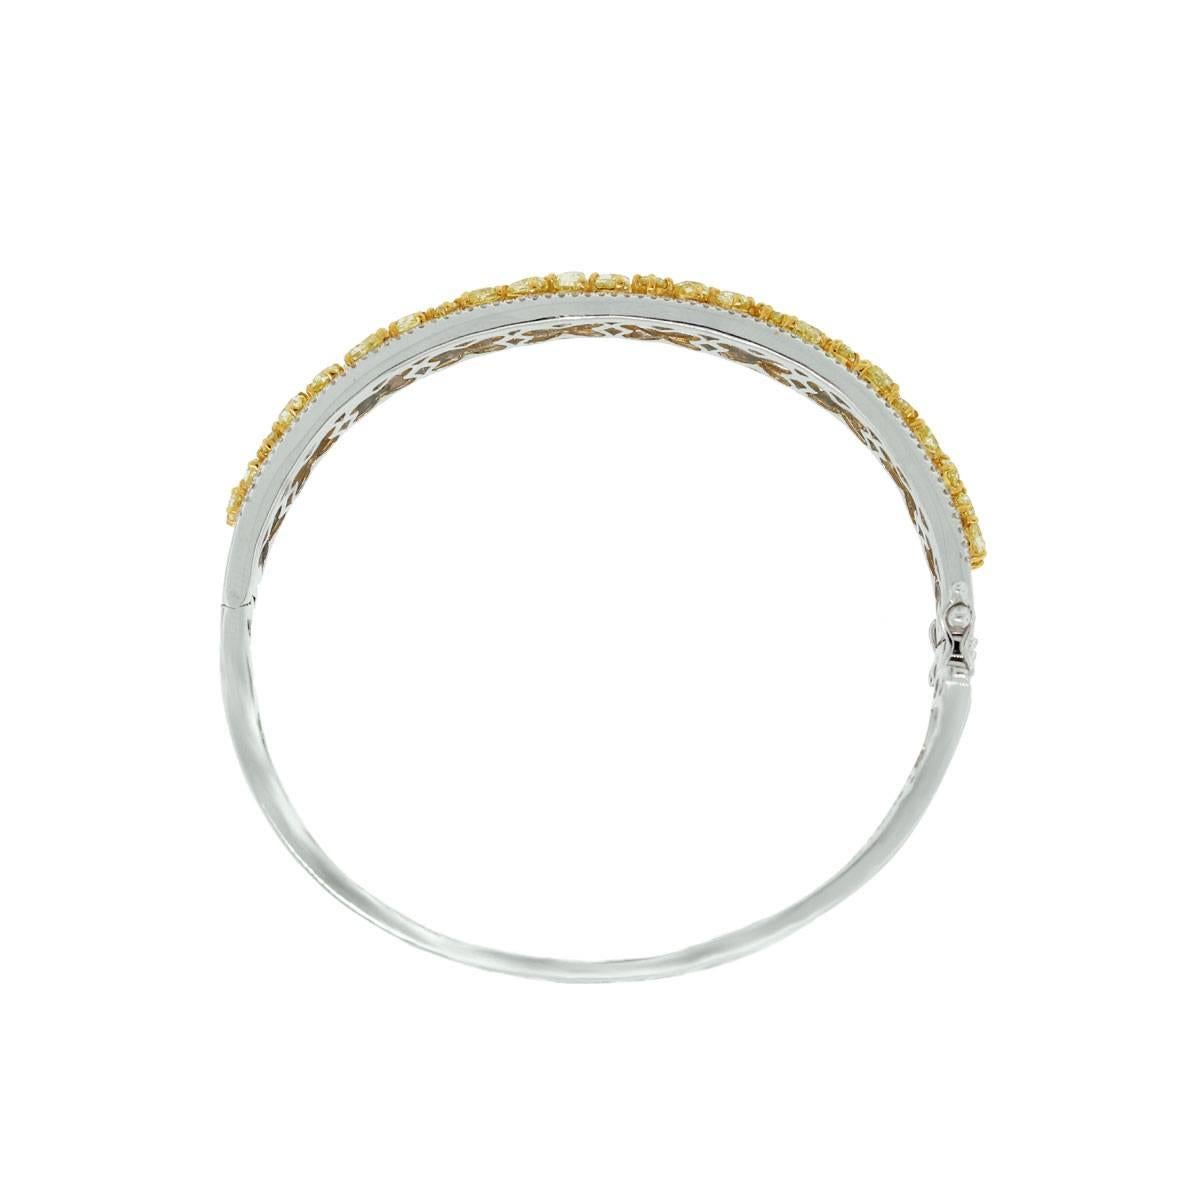 Style- 18k White Gold 5.53ctw Fancy Yellow Diamond Bangle
Material- 18k White Gold with 18k Yellow Gold setting
Diamond Details- Approximately 5.53ctw of Fancy Yellow Diamonds. Diamonds are natural in color and VS in clarity.  Approximately 0.93ctw